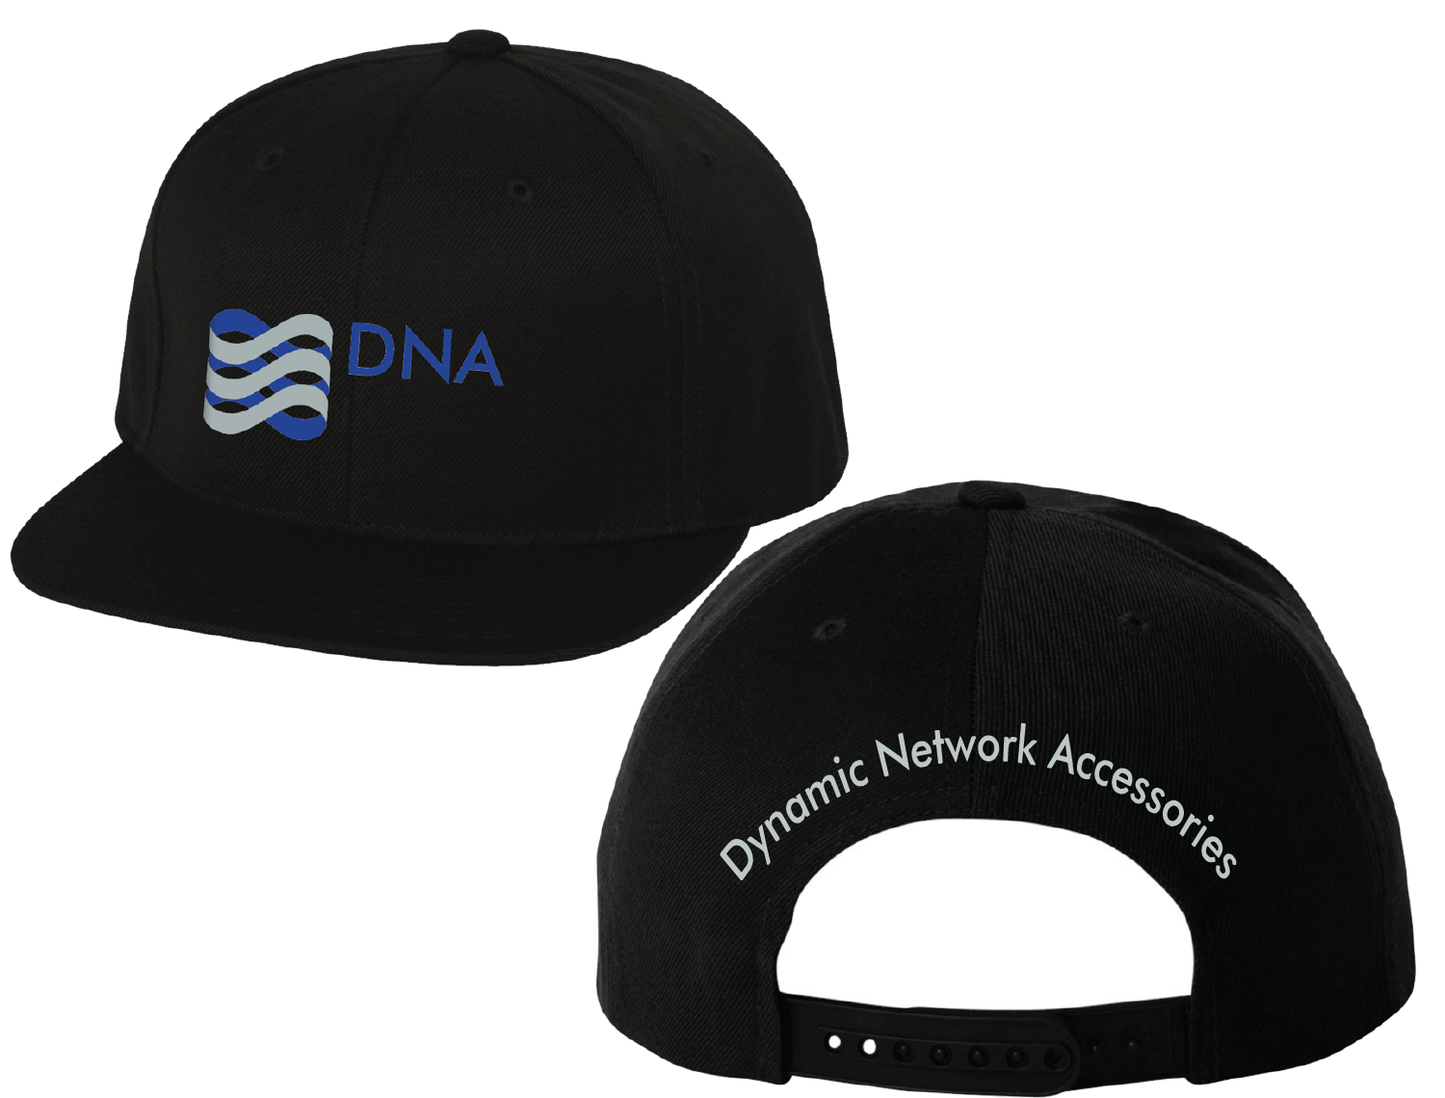 DNA - Snapback Classic with back logo